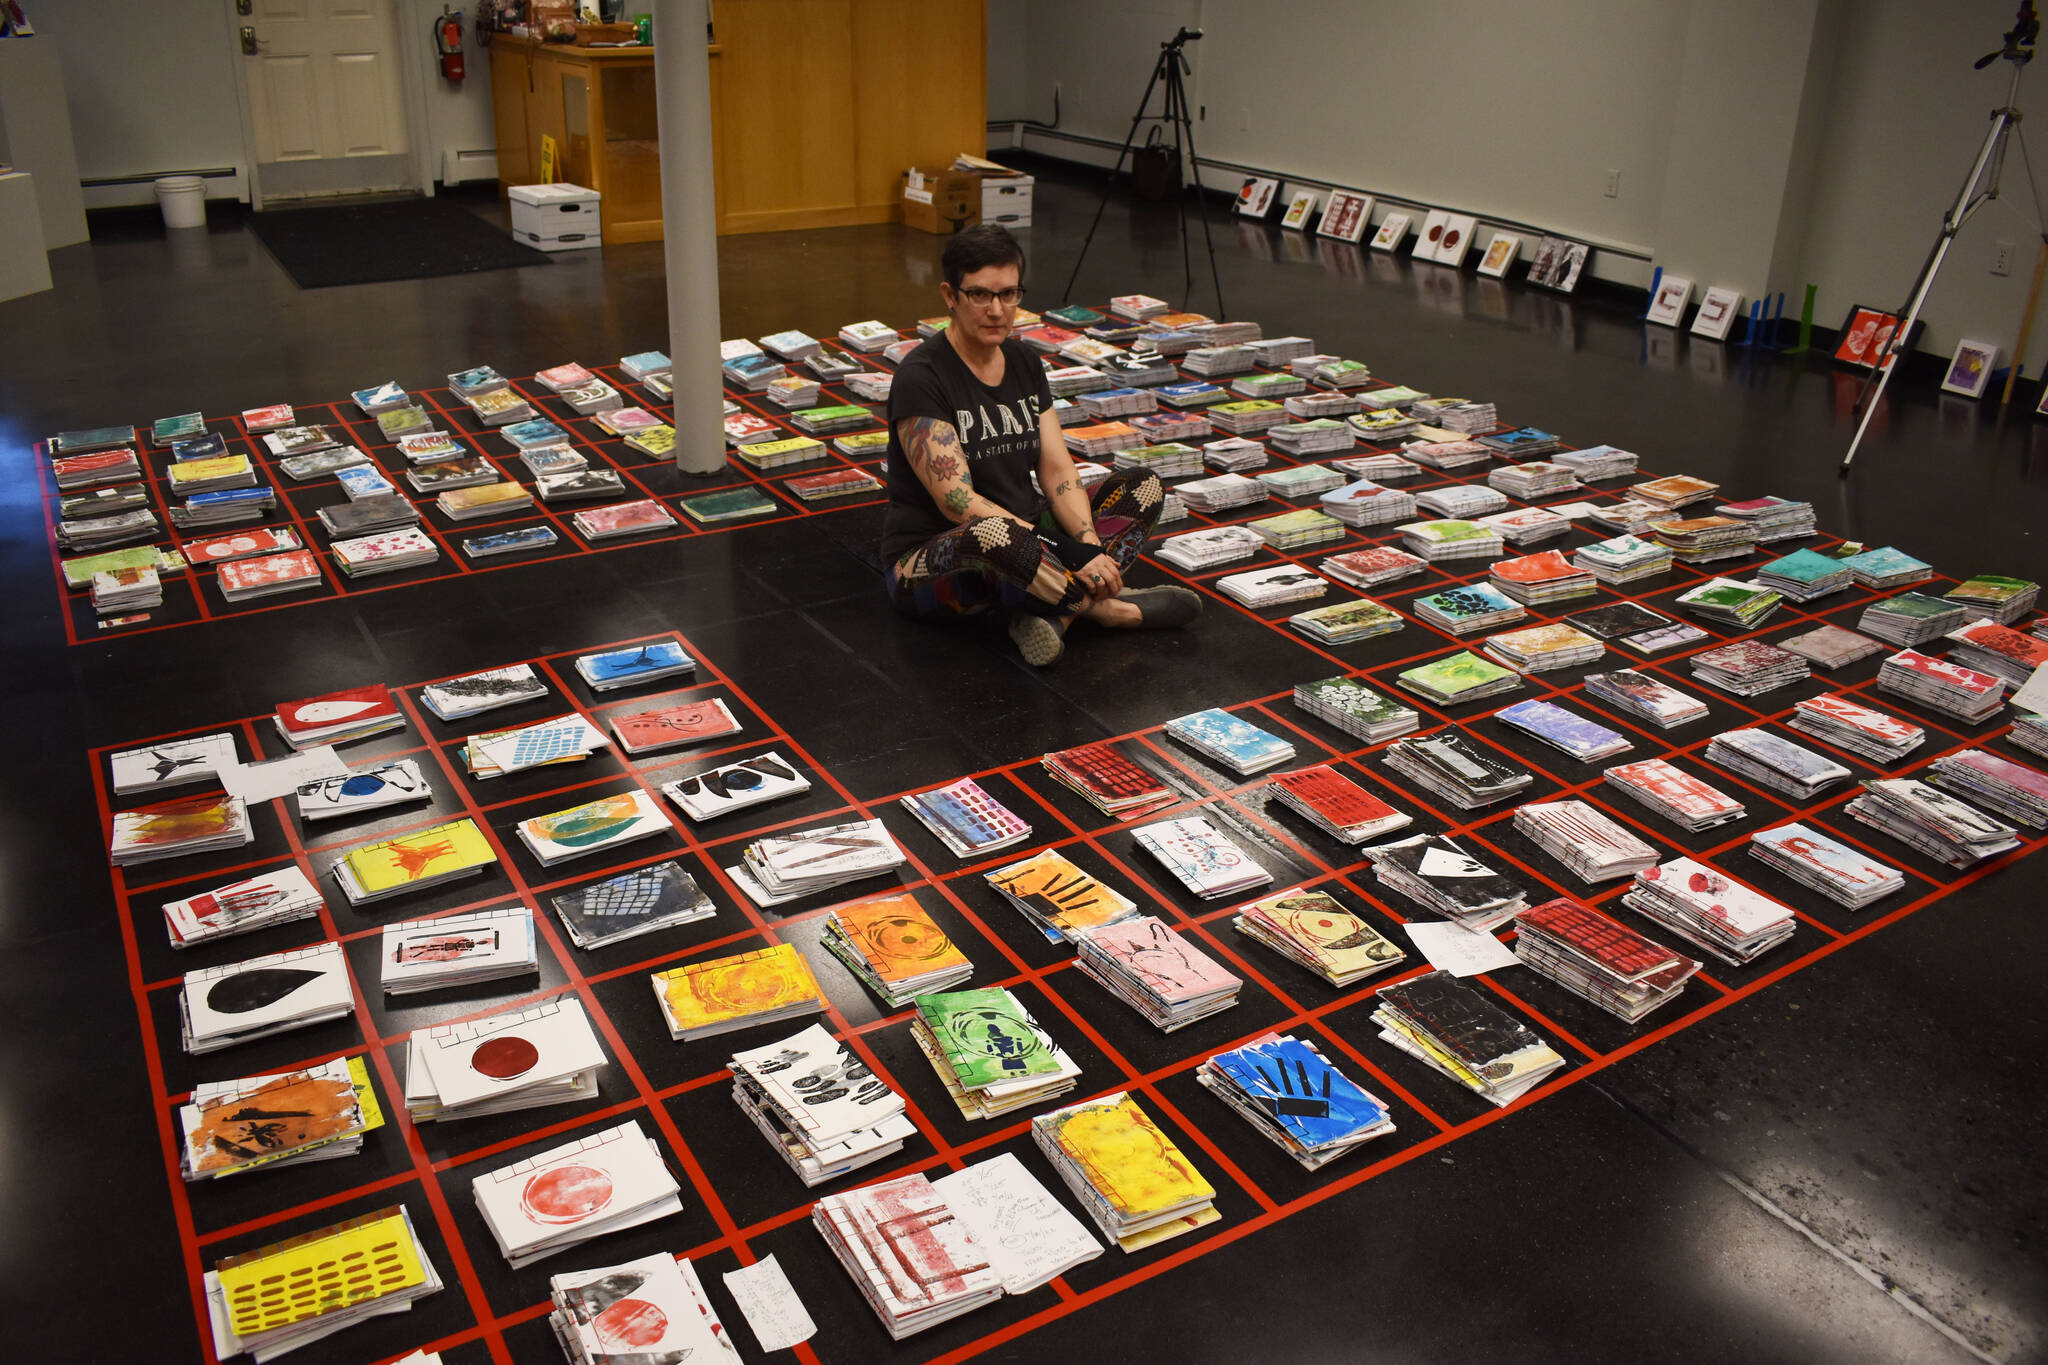 Jake Dye / Peninsula Clarion 
Diane Dunn sits, surrounded by 2,000 journals she made and painted by hand, on Tuesday, ahead of the opening of “2000 Journals: Filling the Void” at the Kenai Art Center.